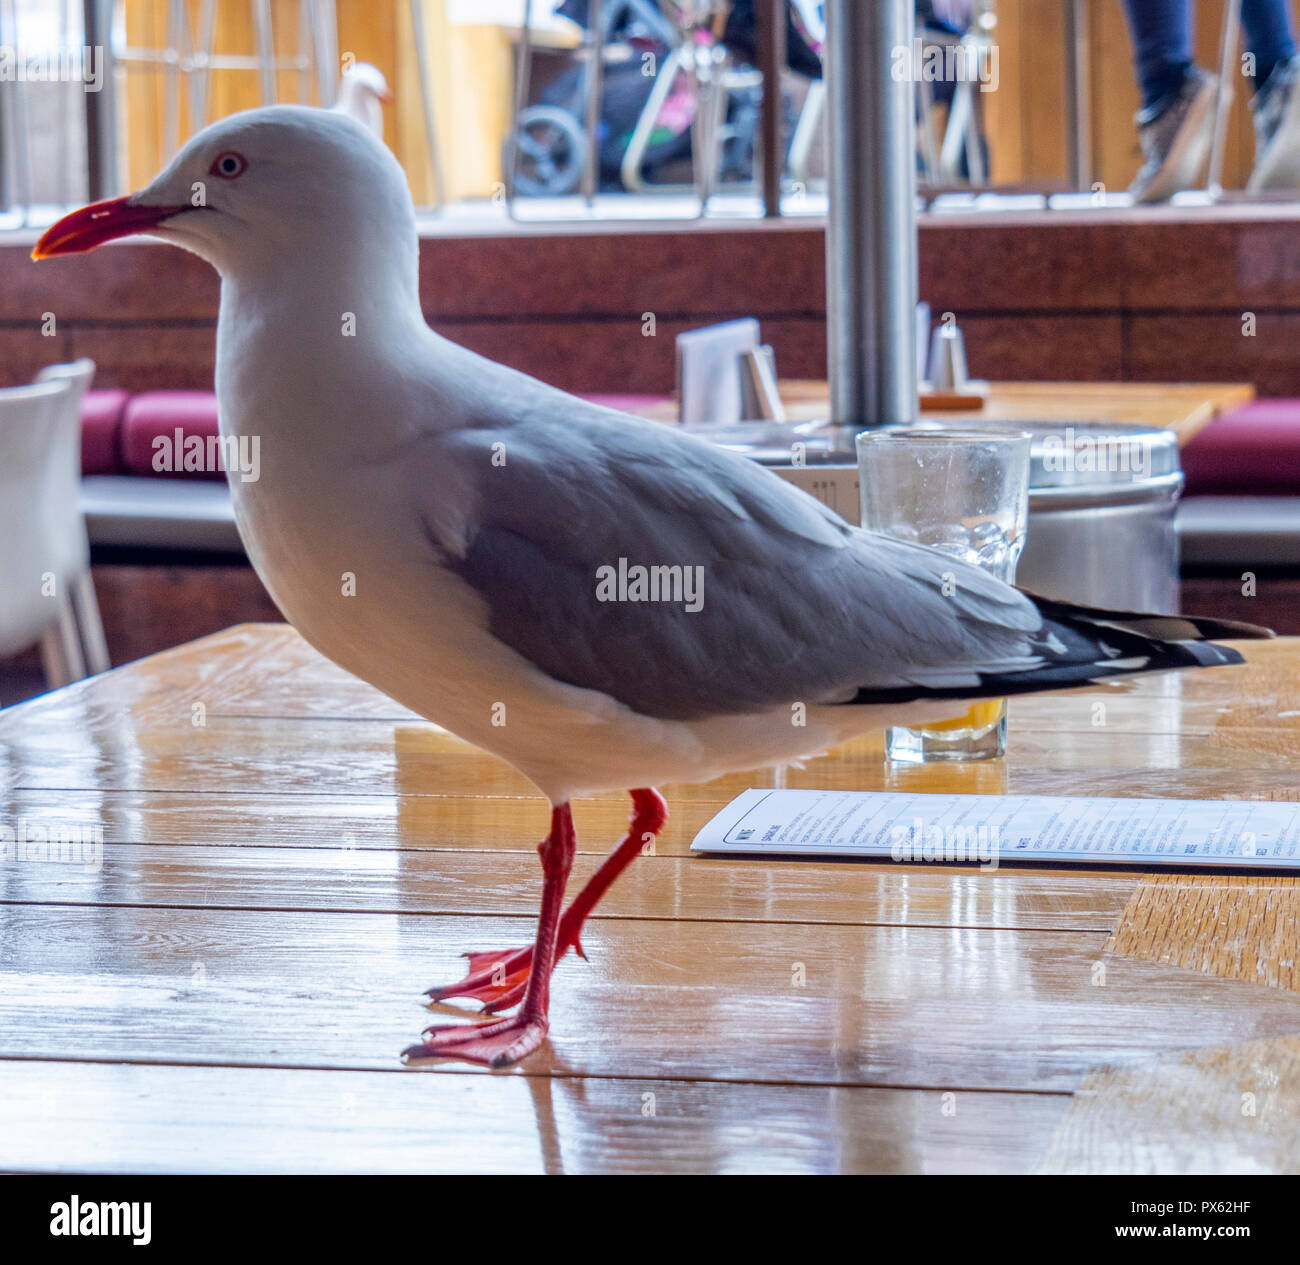 Seagull on a table looking for food scraps at Opera Kitchen restaurant Circular Quay Sydney NSW Australia. Stock Photo